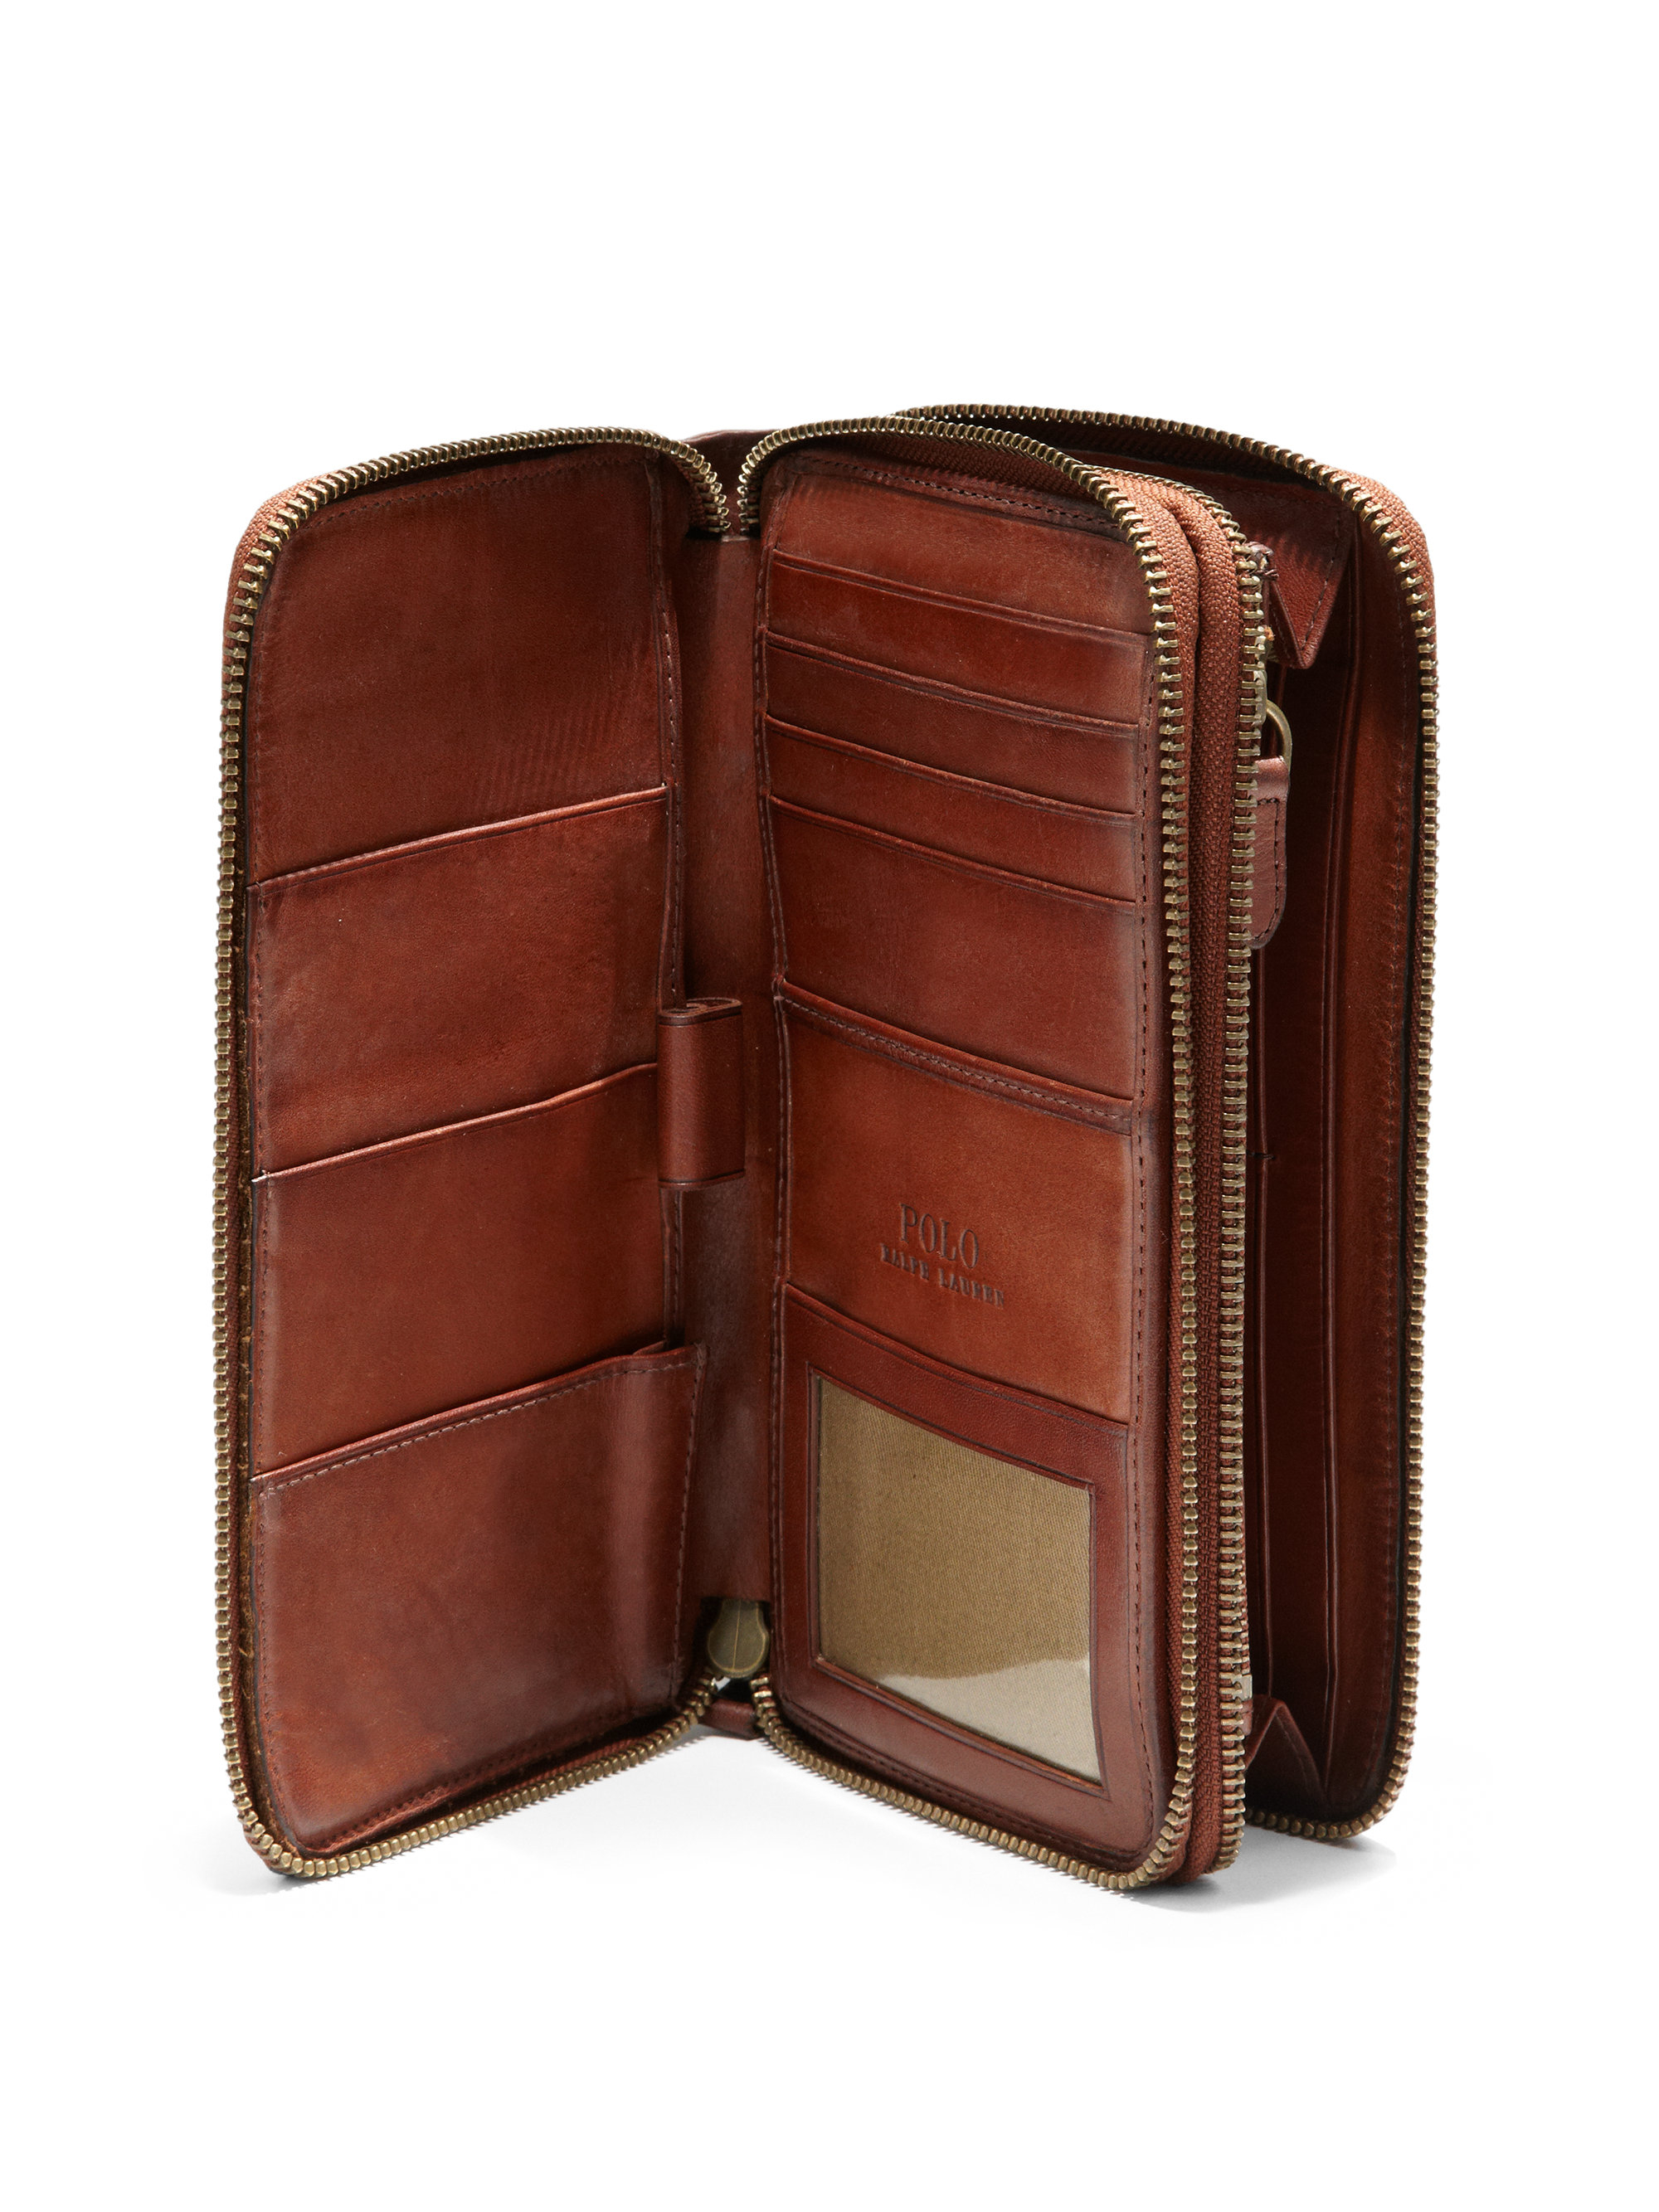 Polo Ralph Lauren Heritage Leather Travel Wallet in Brown for Men | Lyst